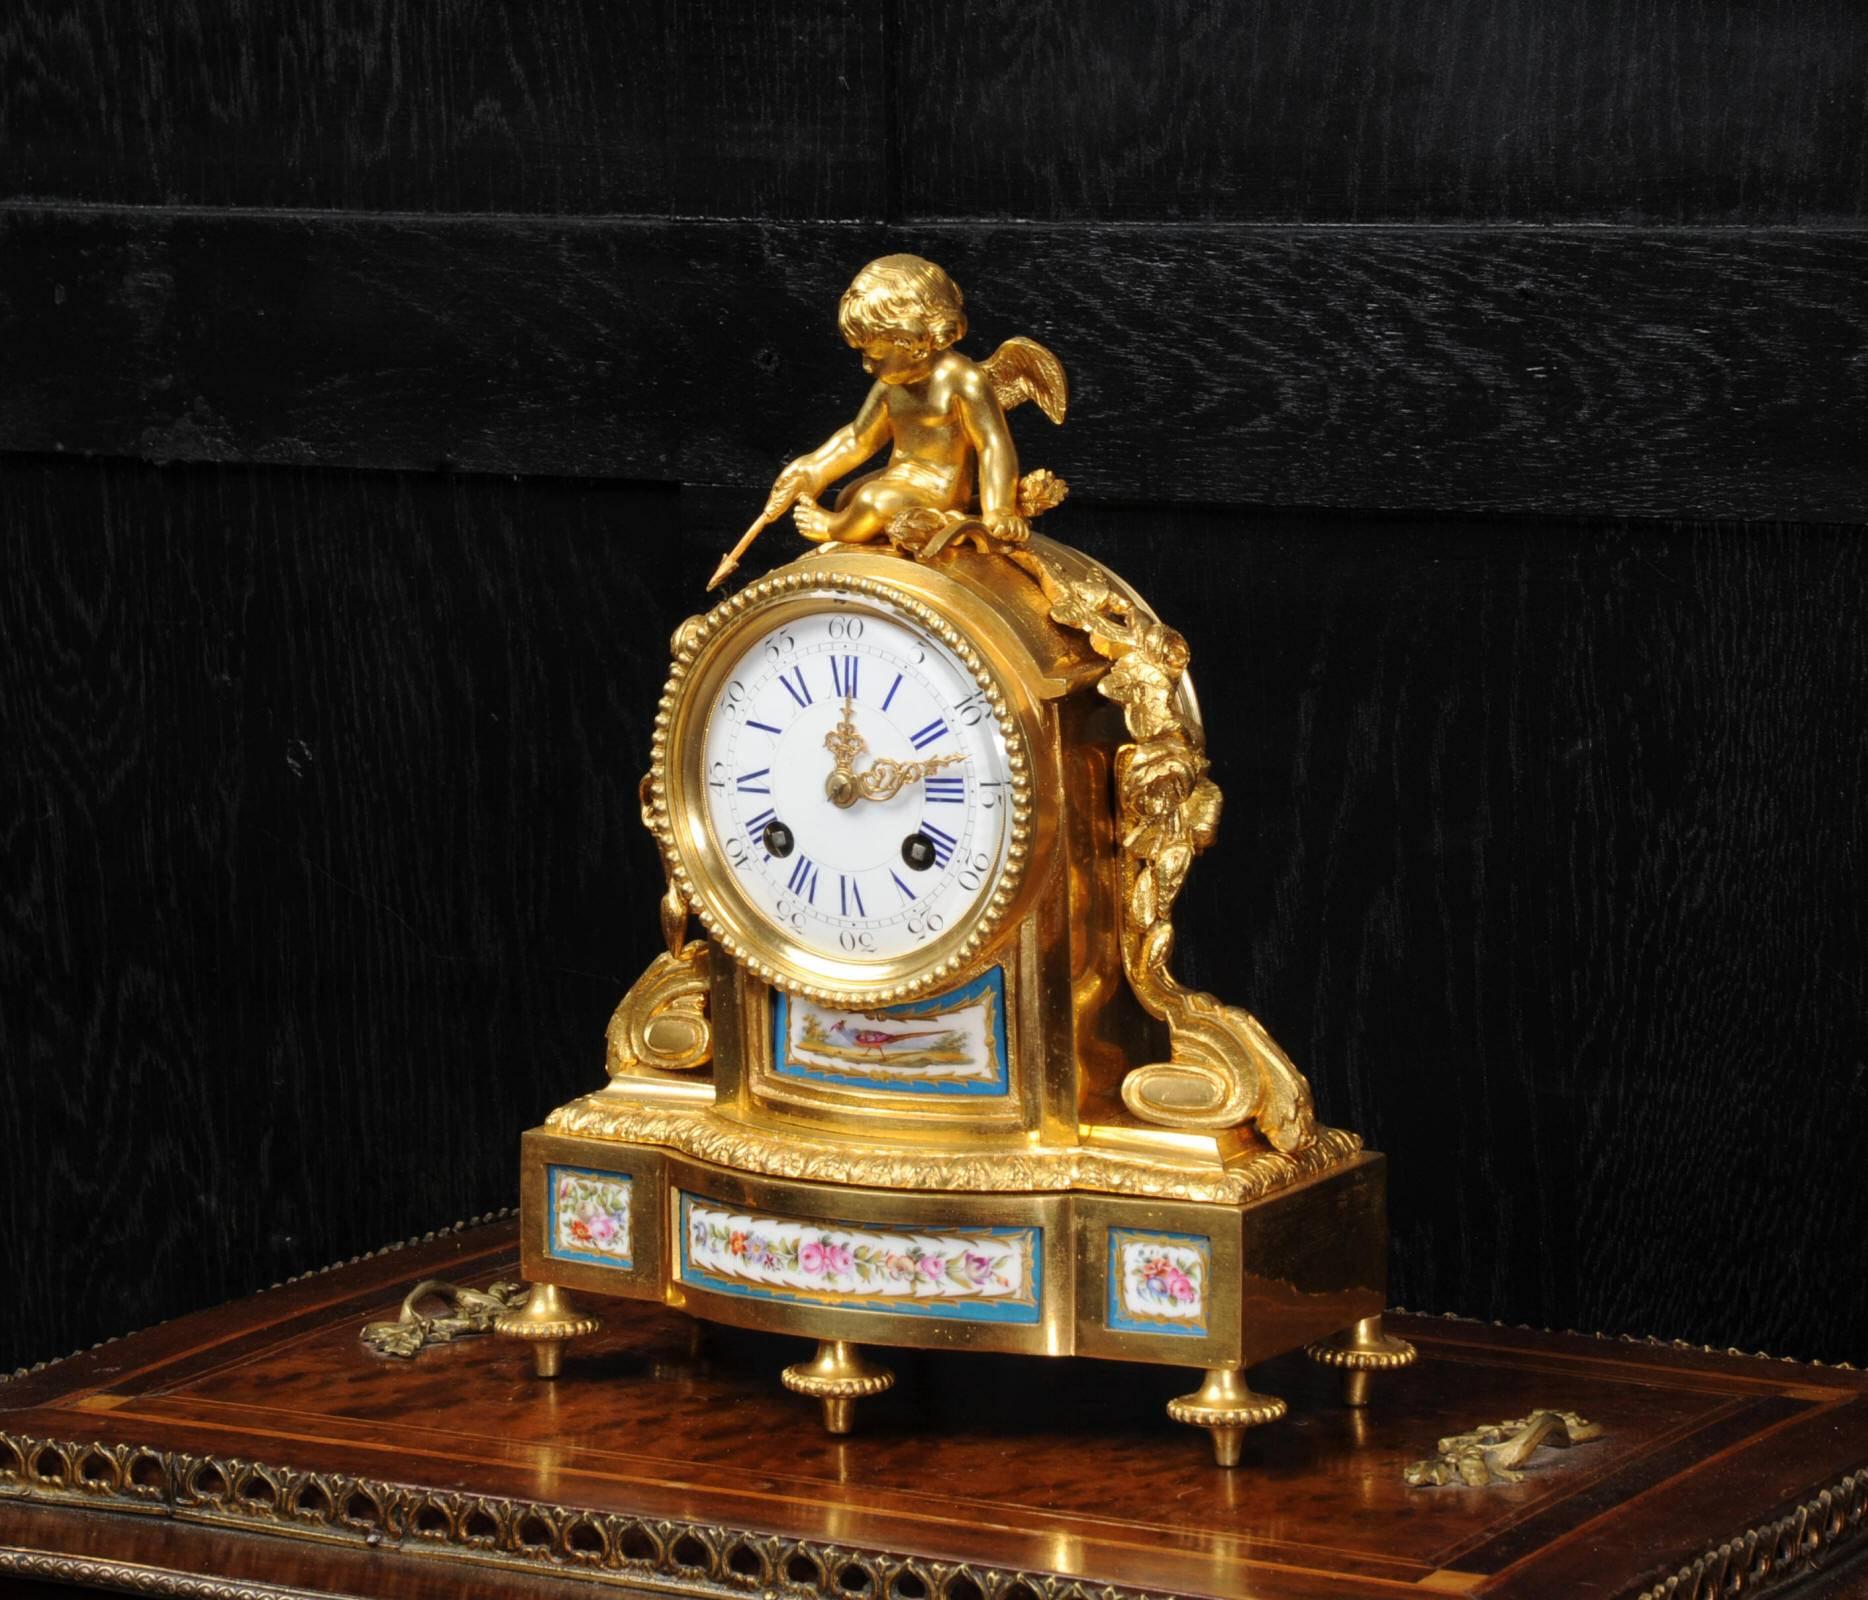 A fine and early clock by Japy Freres, fully overhauled and working. It is beautifully made in ormolu (fire gilded bronze doré) mounted with exquisite Sèvres style porcelain. The porcelain has a Bleu Celeste ground with delicately painted flowers